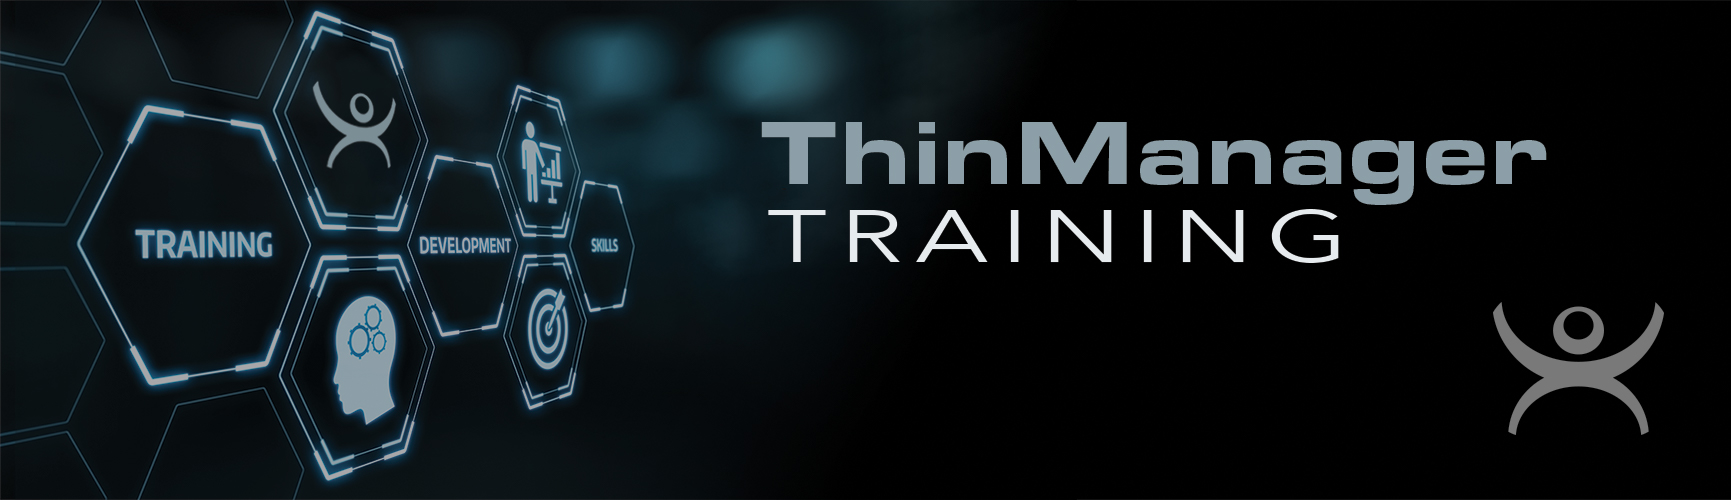 ThinManager Training